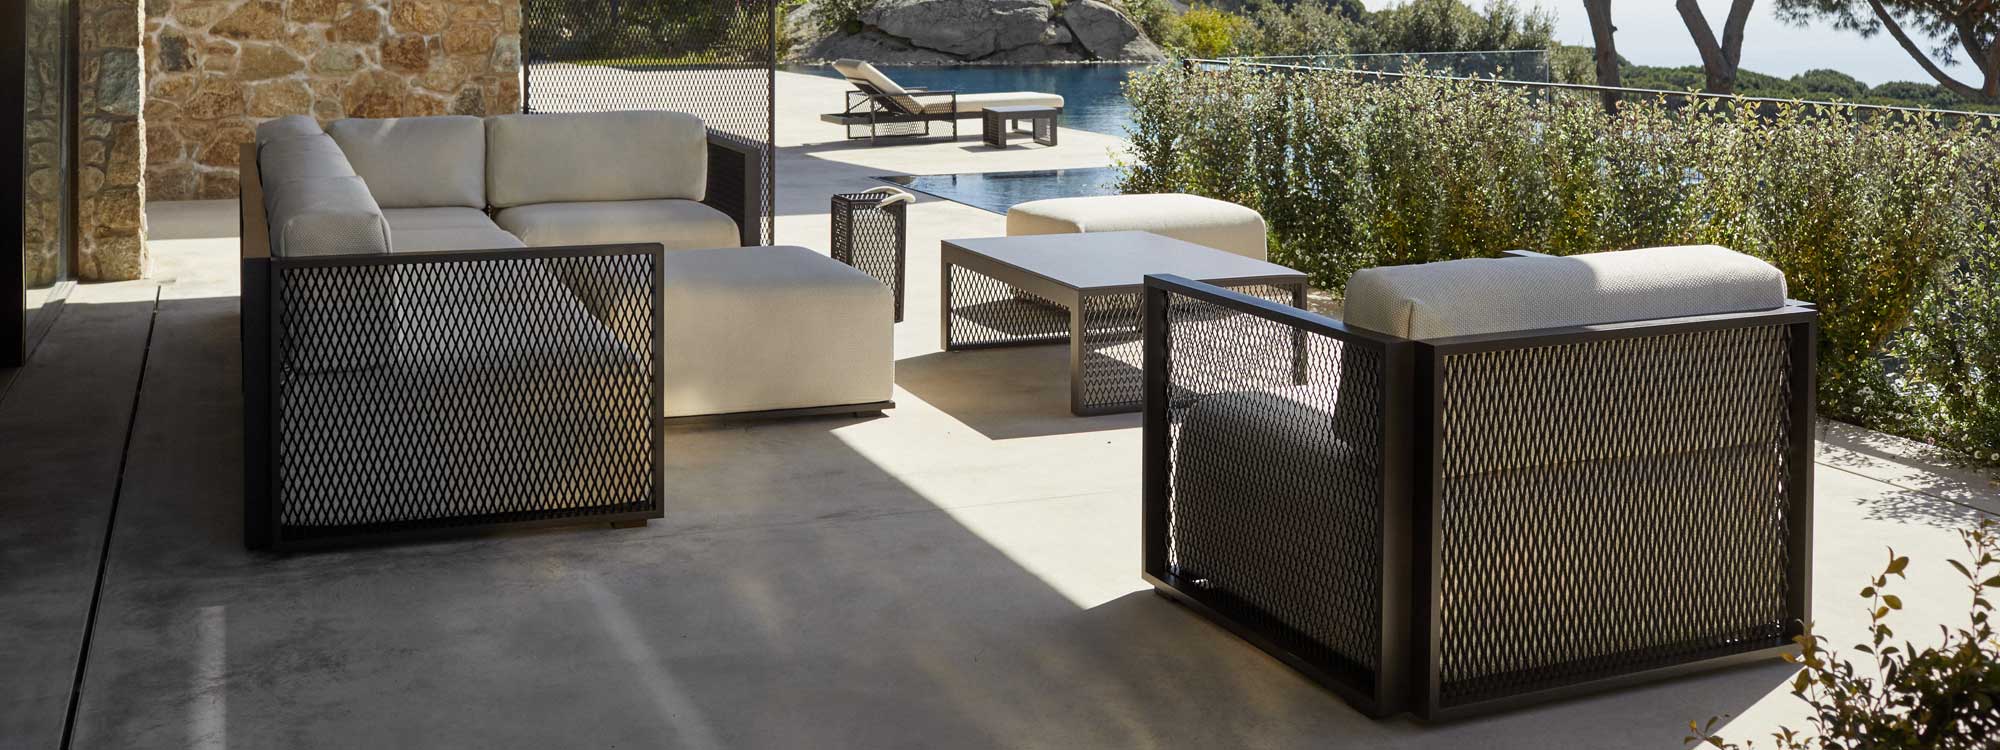 Image of Vondom The Factory modern outdoor lounge set in the light and shade of a sunny Mediterranean terrace